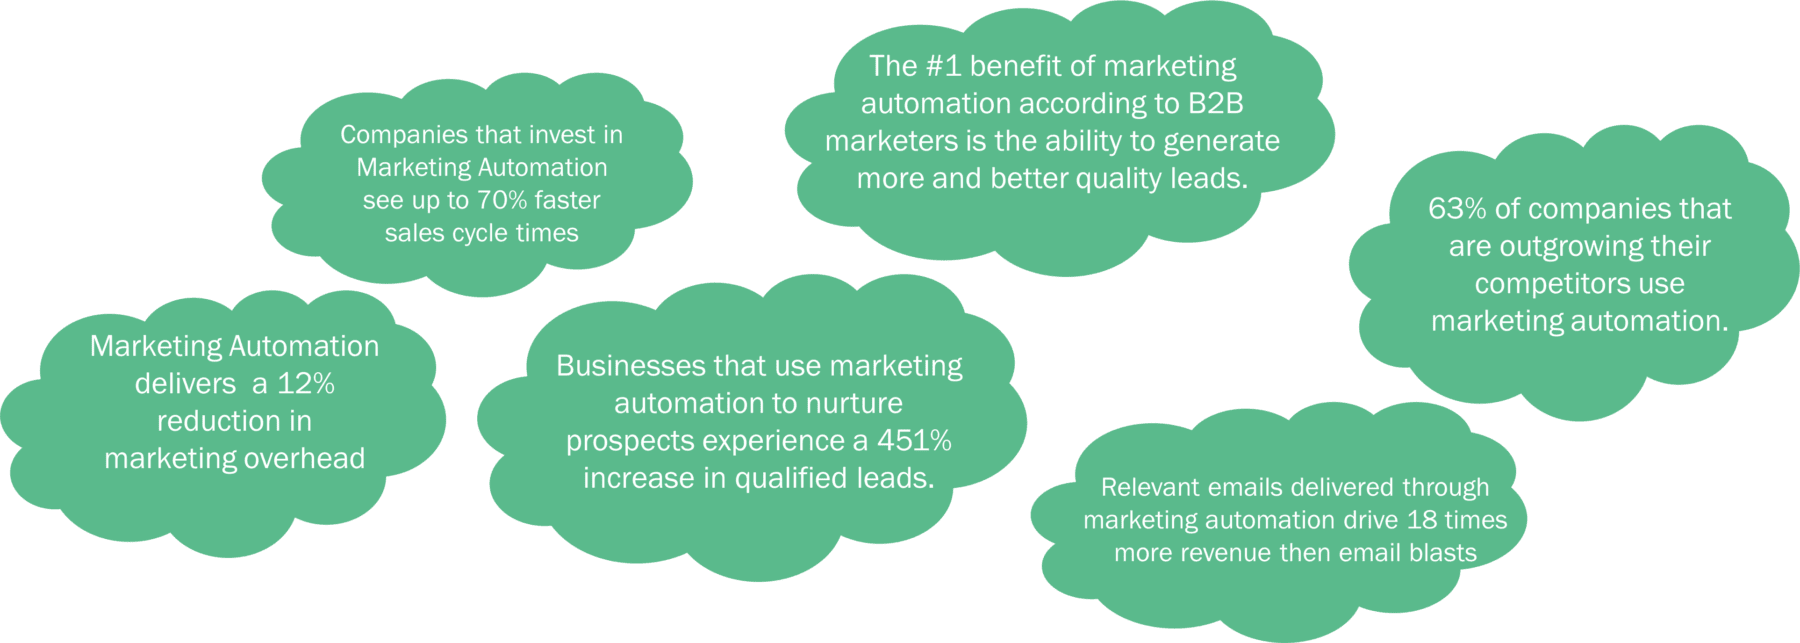 Marketing Automation Stats in the cloud